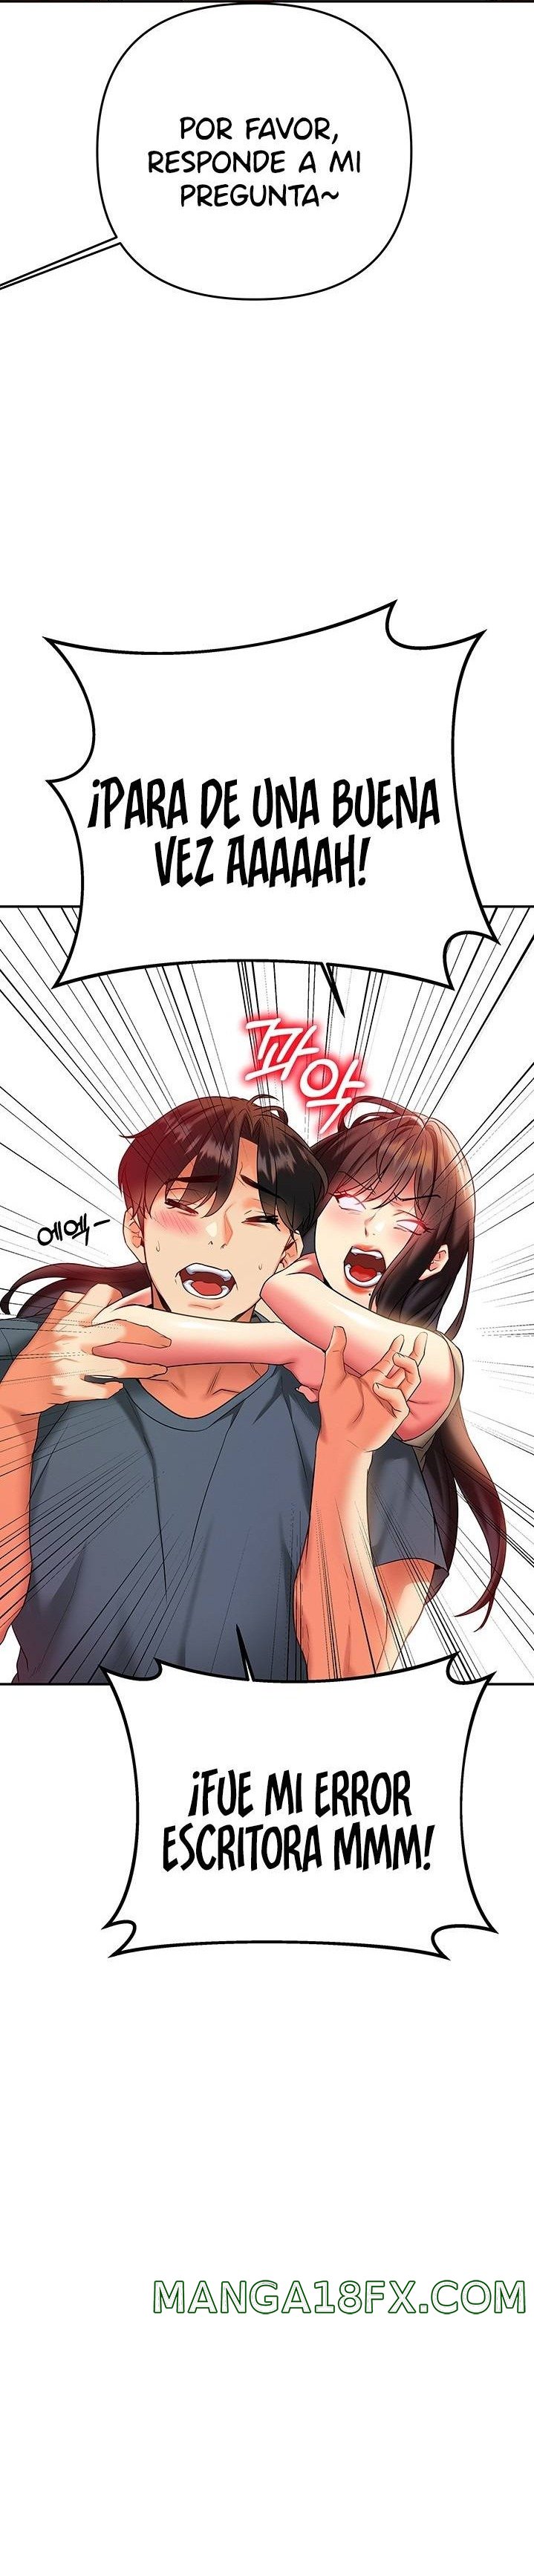 I Need You, Noona Raw - Chapter 24 Page 17